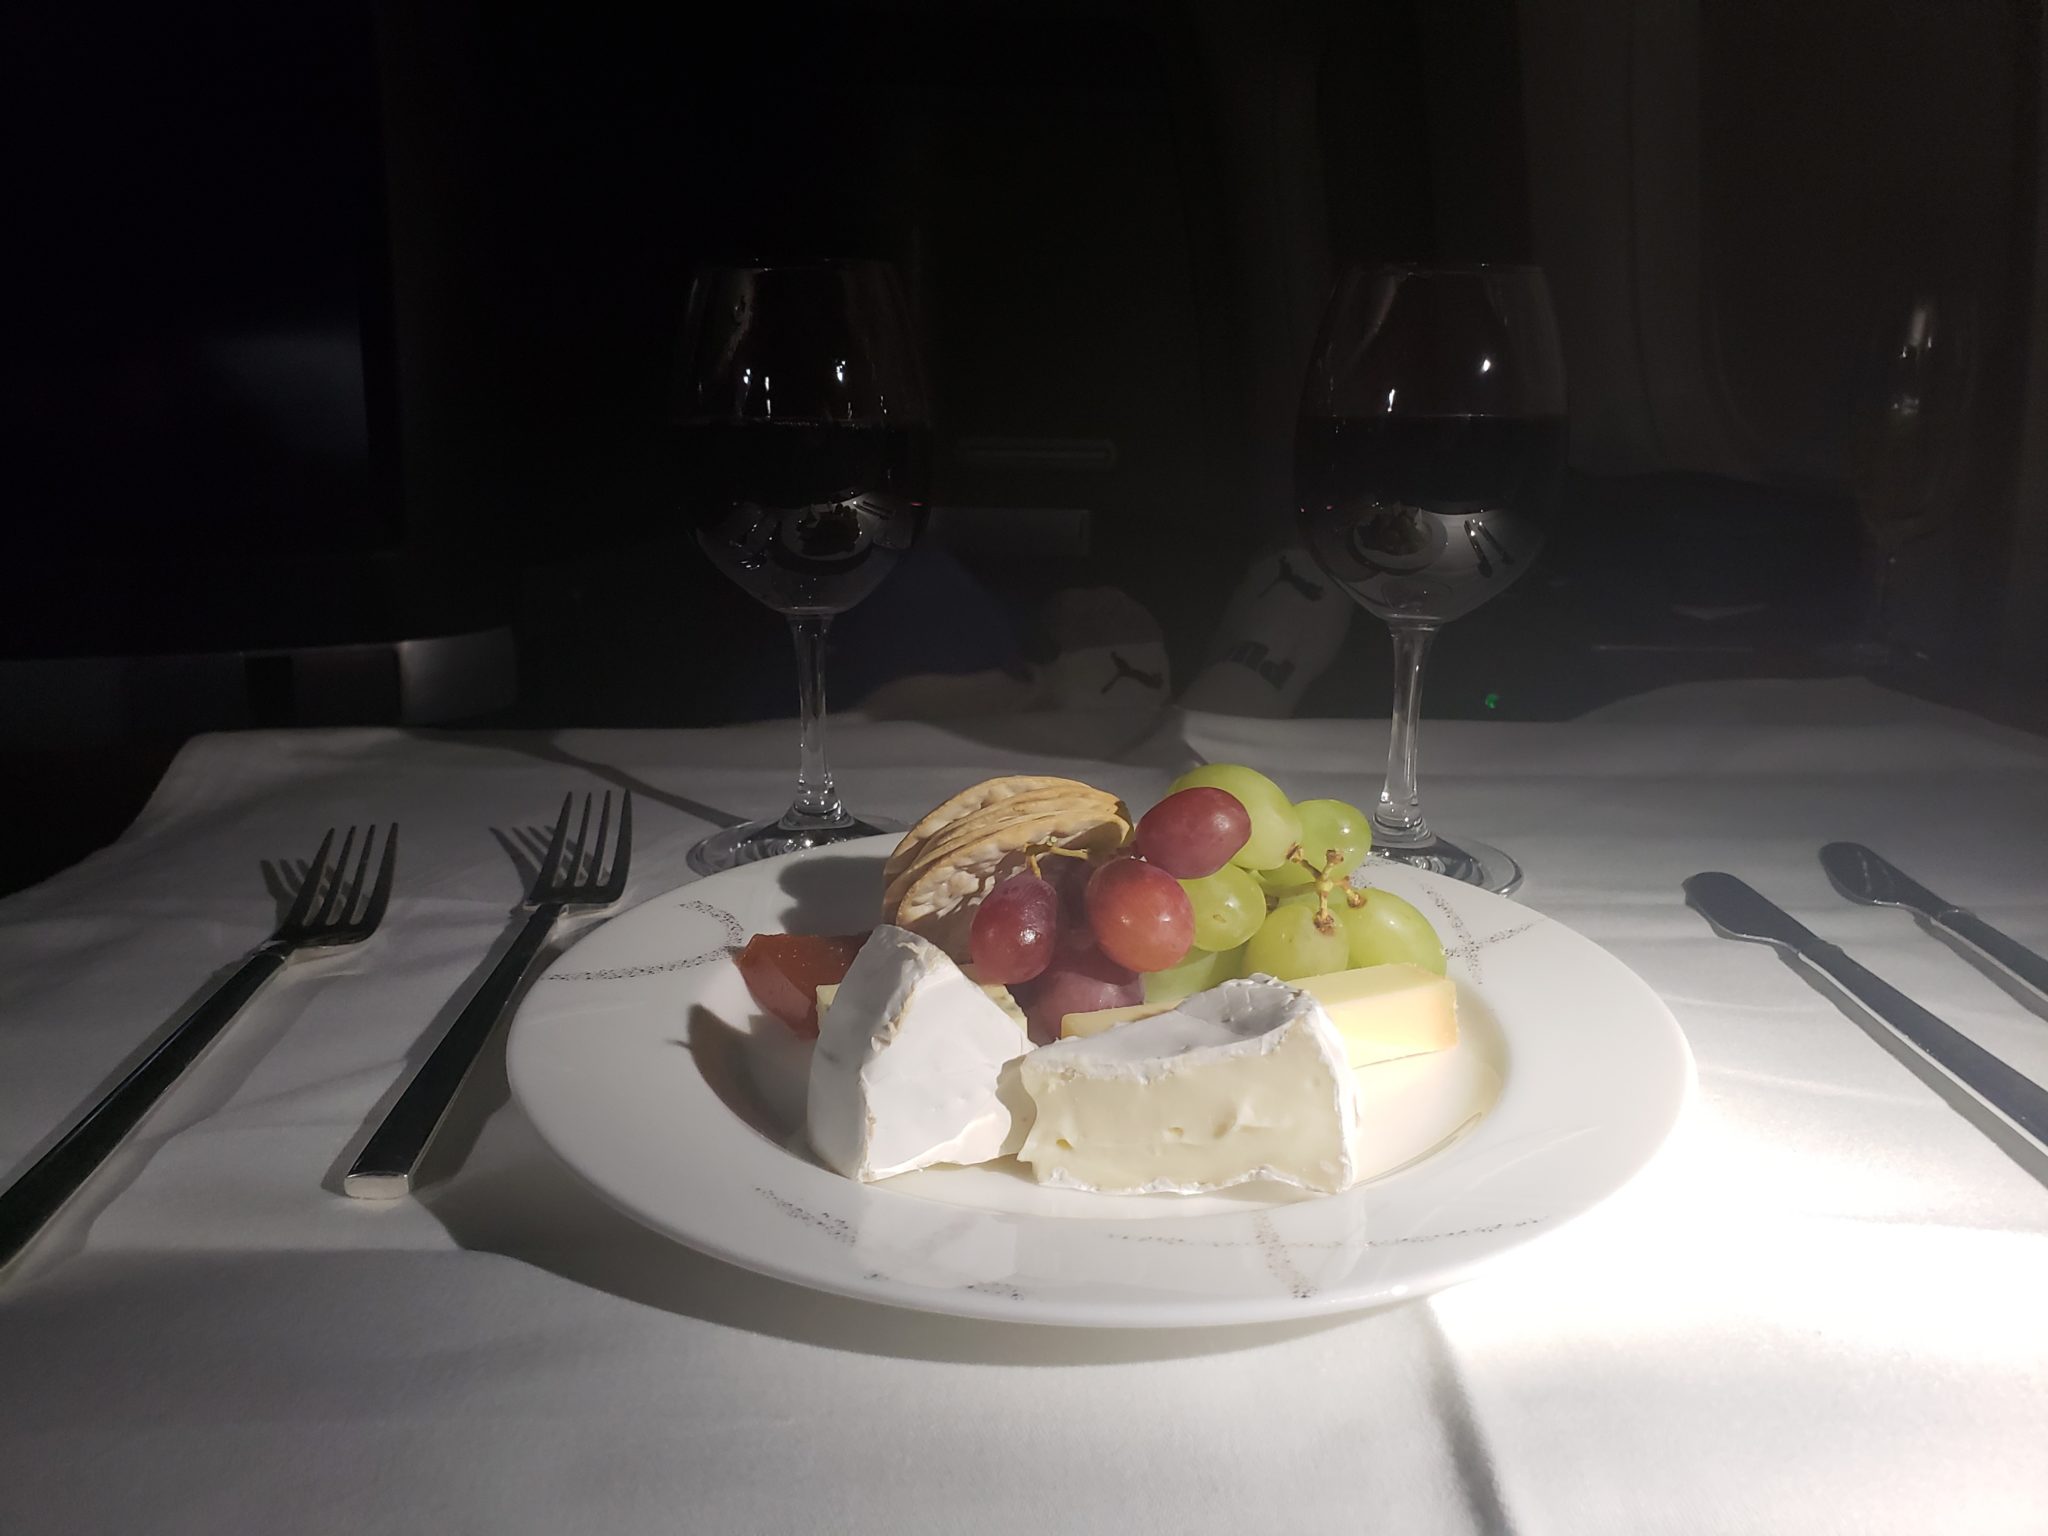 a plate of food and wine glasses on a table